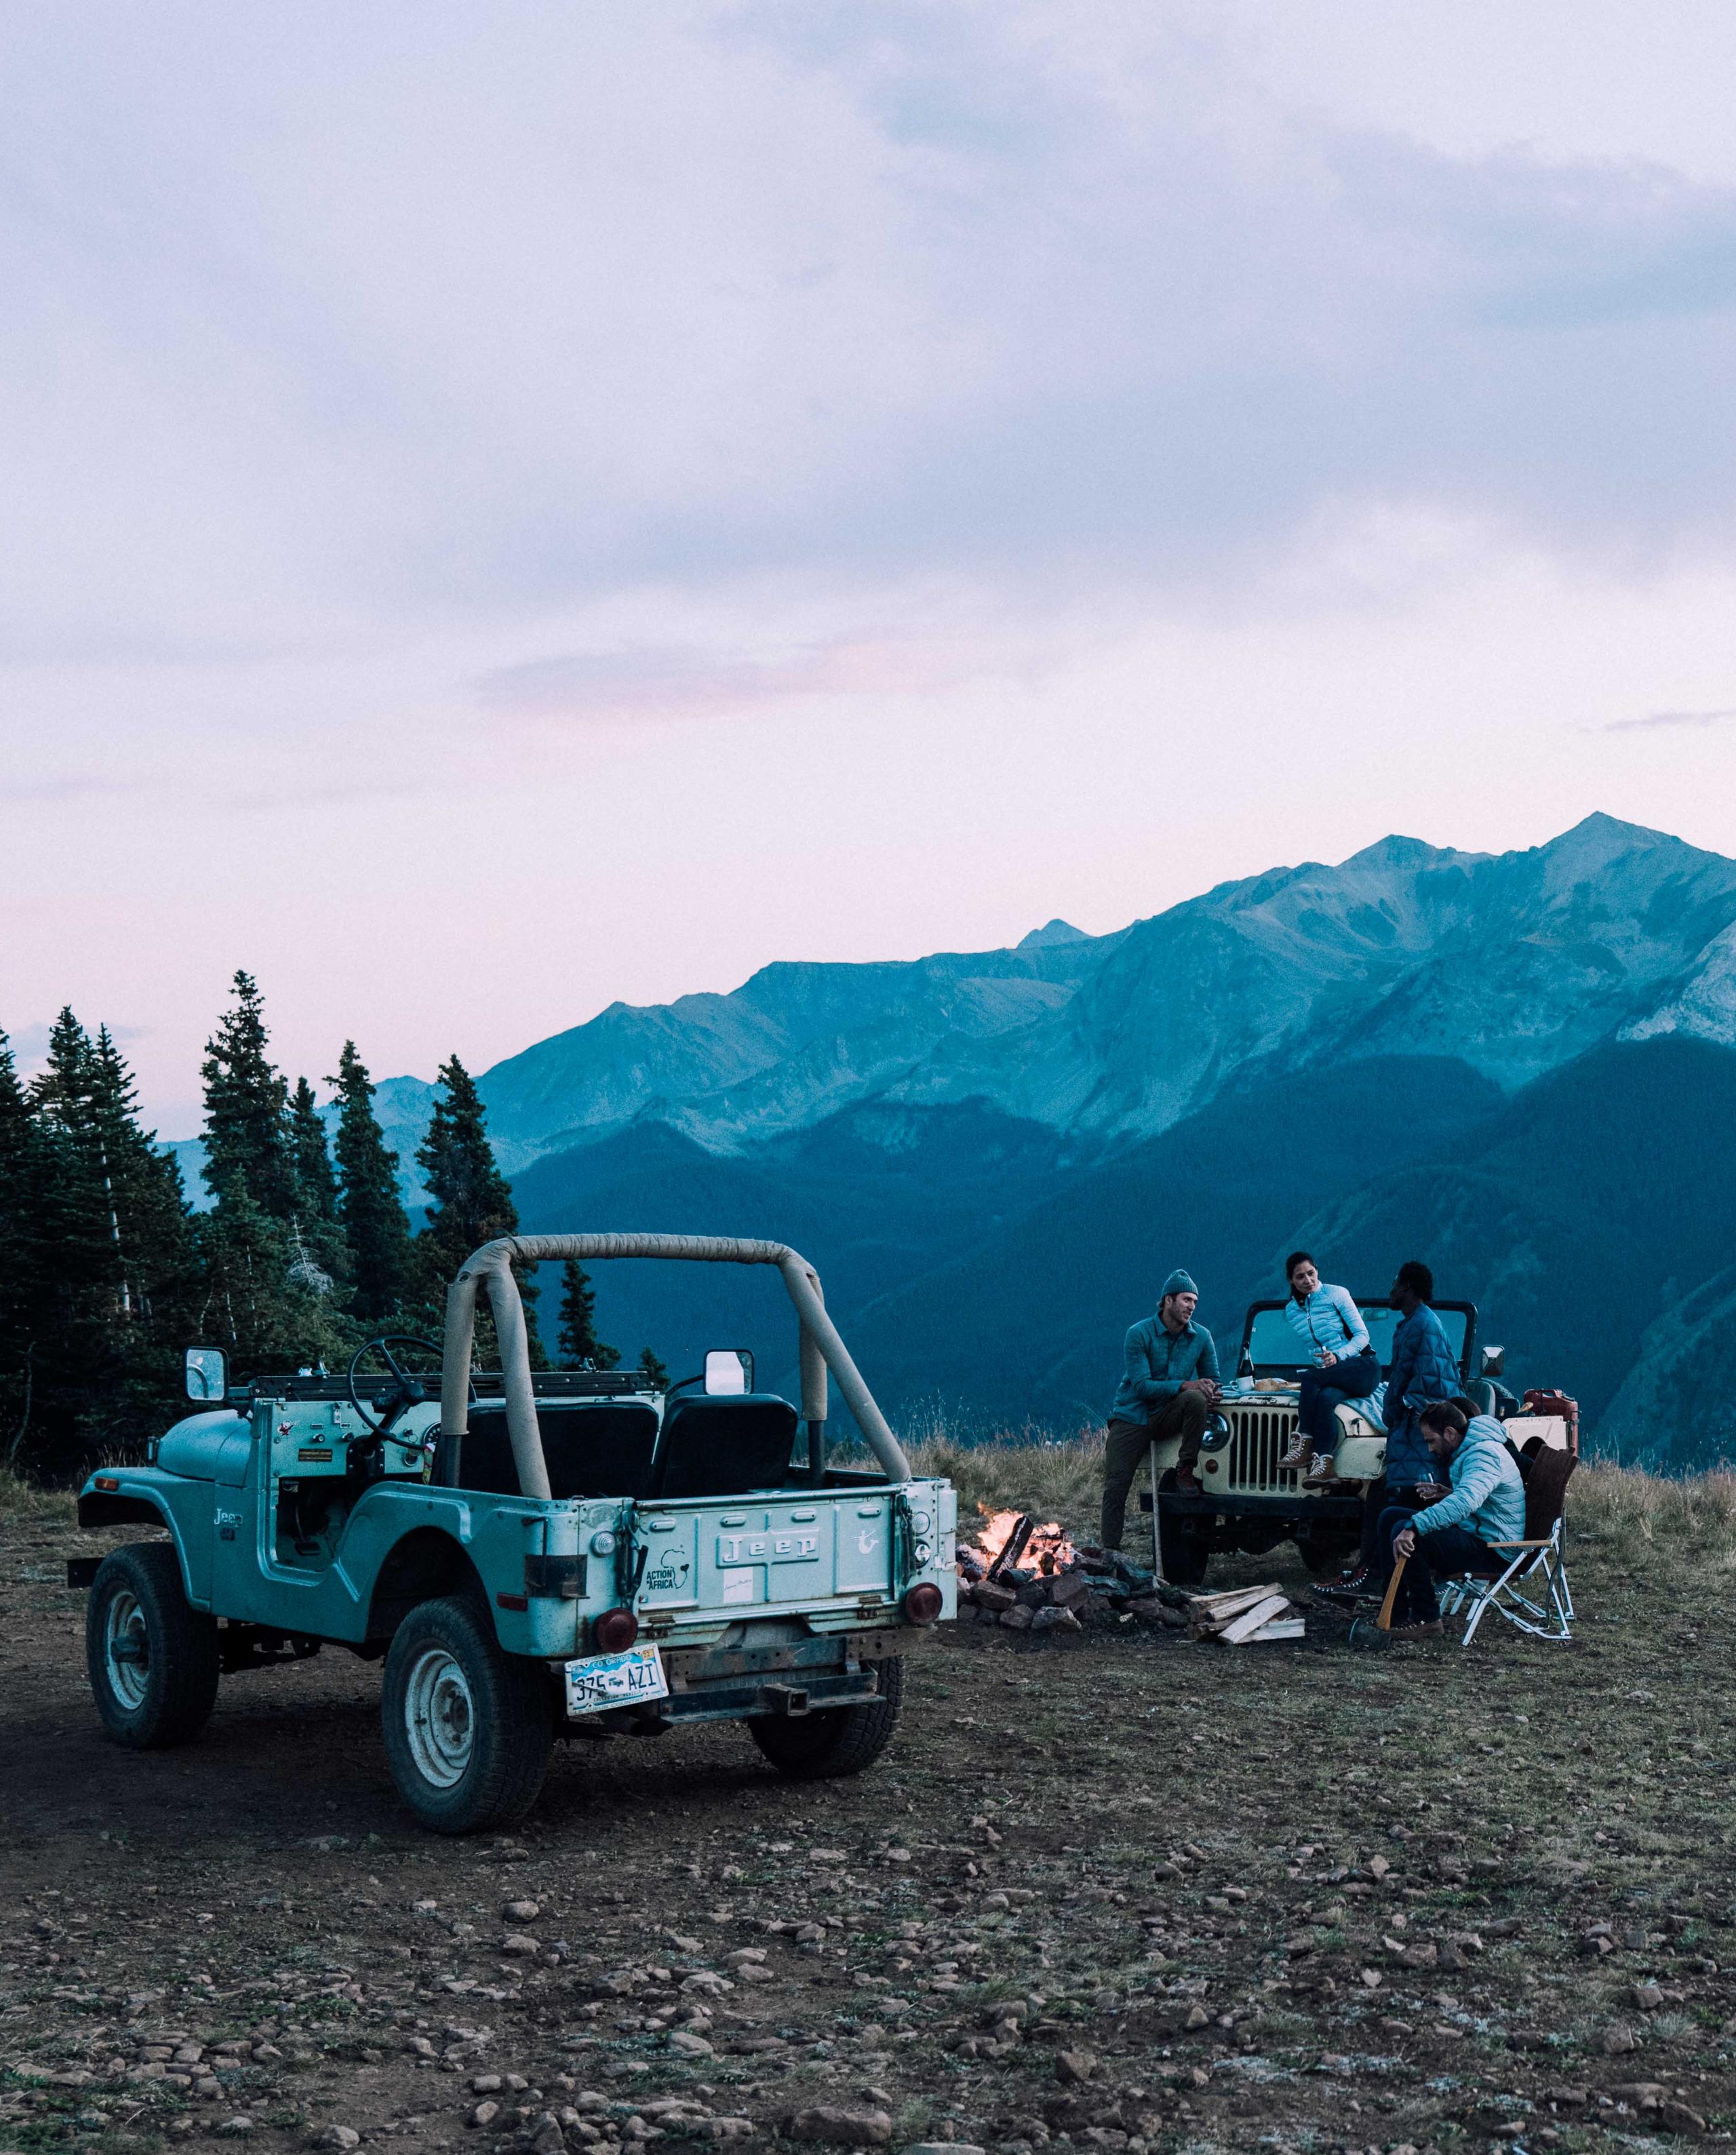 Four friends around campfire and vintage Jeep at dusk in Aspen mountains